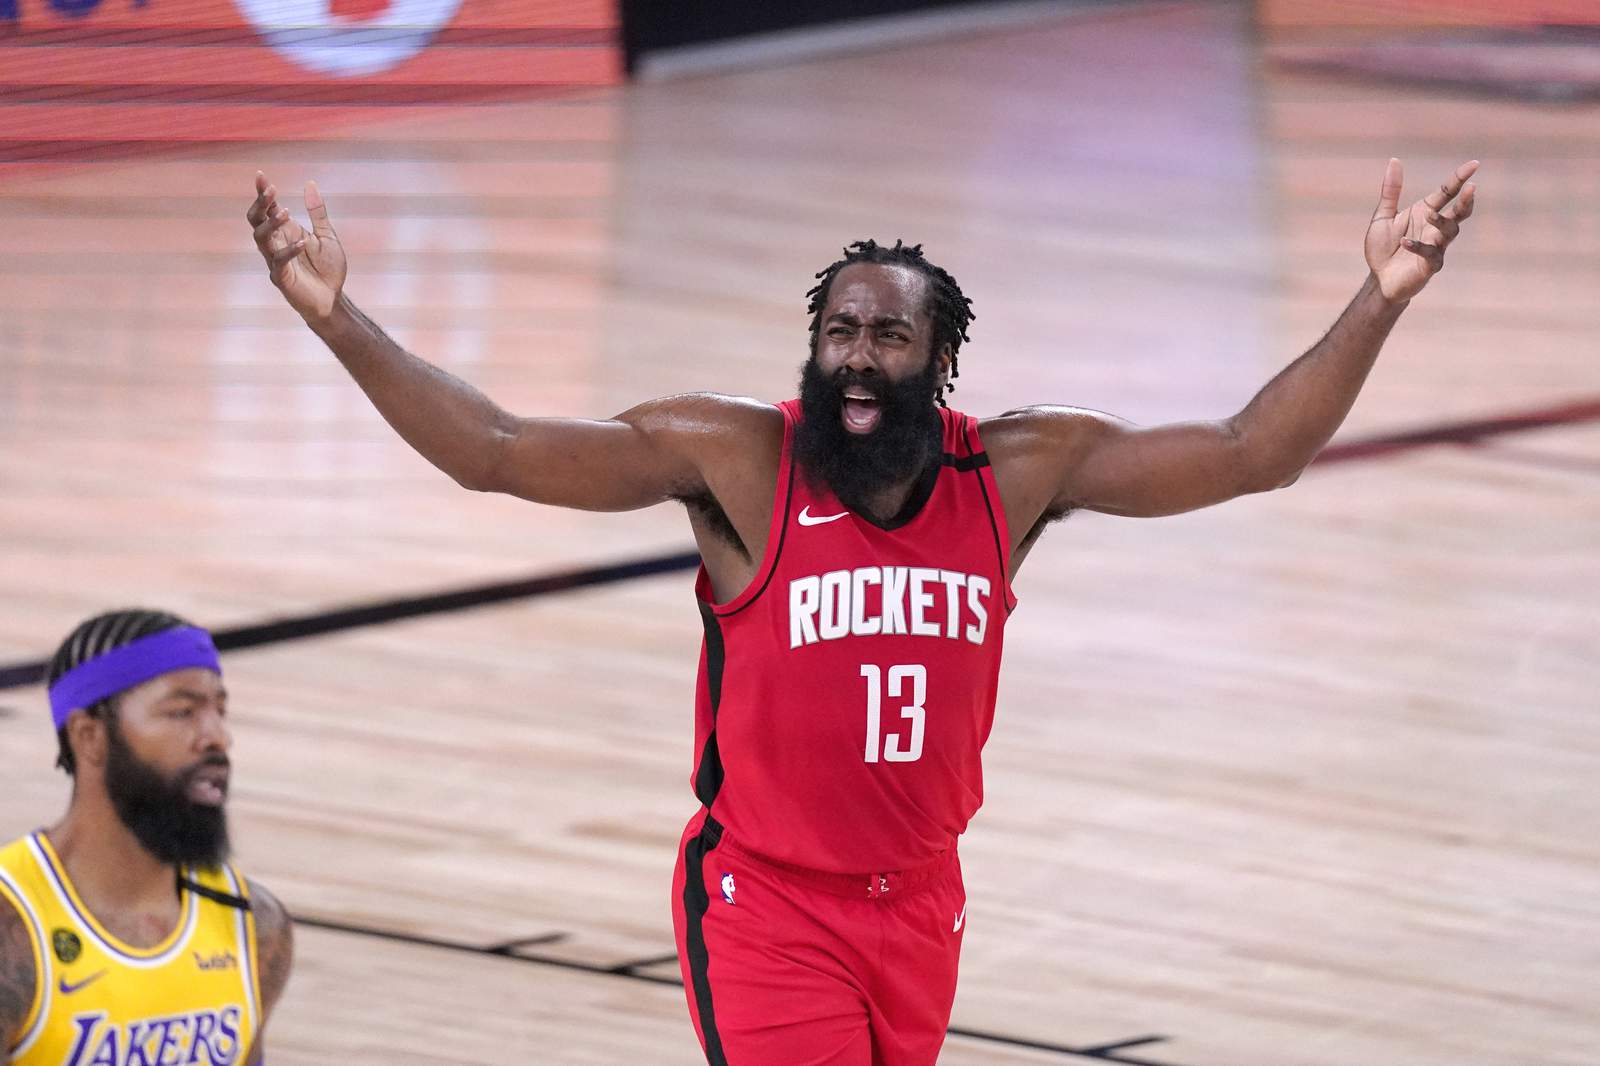 Rockets' James Harden, Russell Westbrook make All-Star team; LeBron makes team for record 16th time